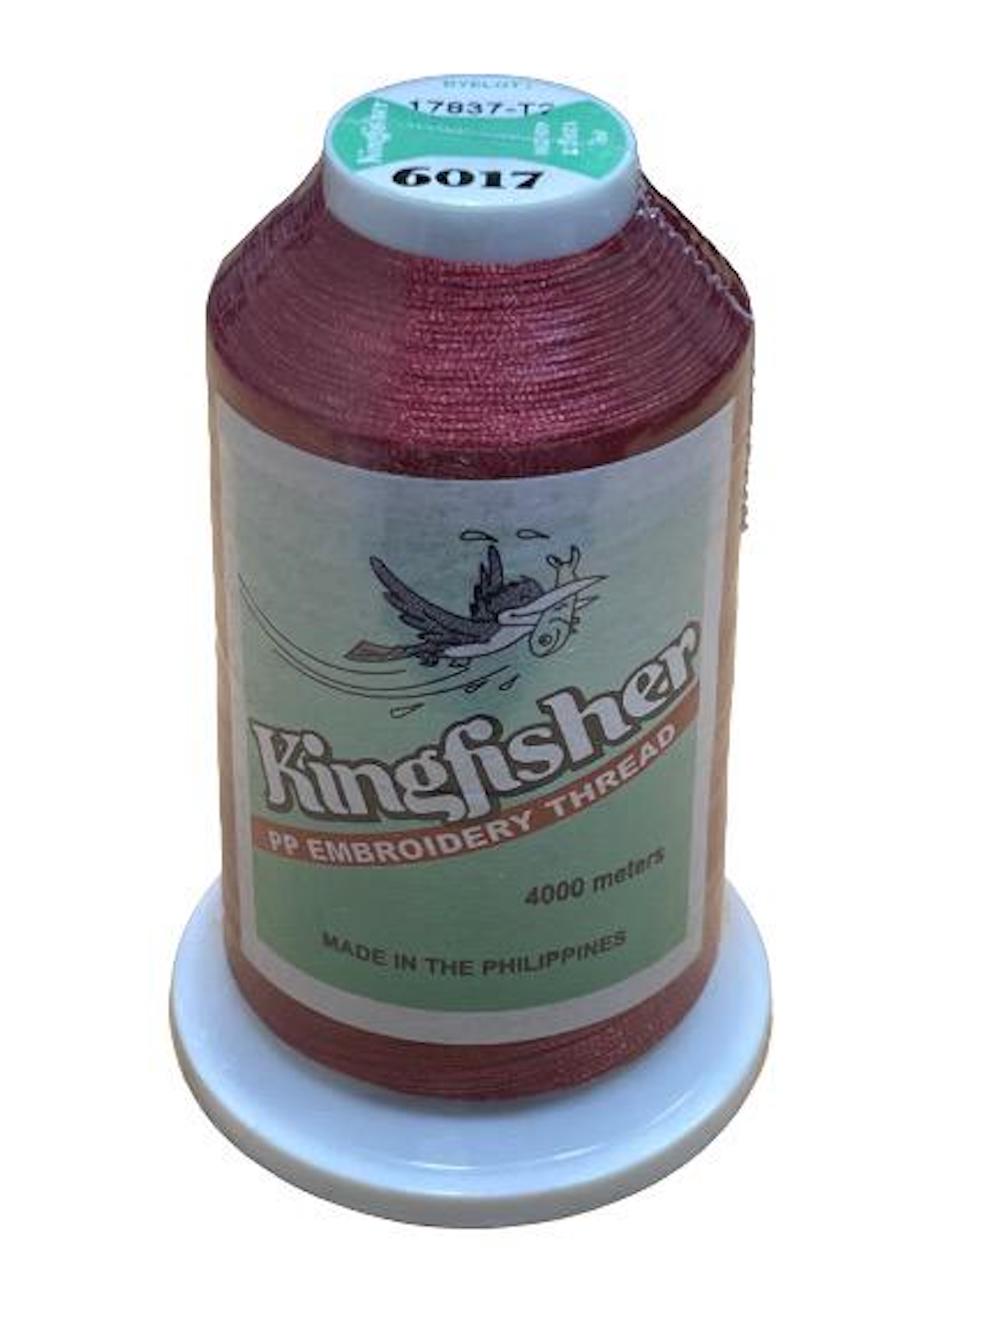 King Fisher Embroidery Thread 4000m 6017 - MY SEWING MALL